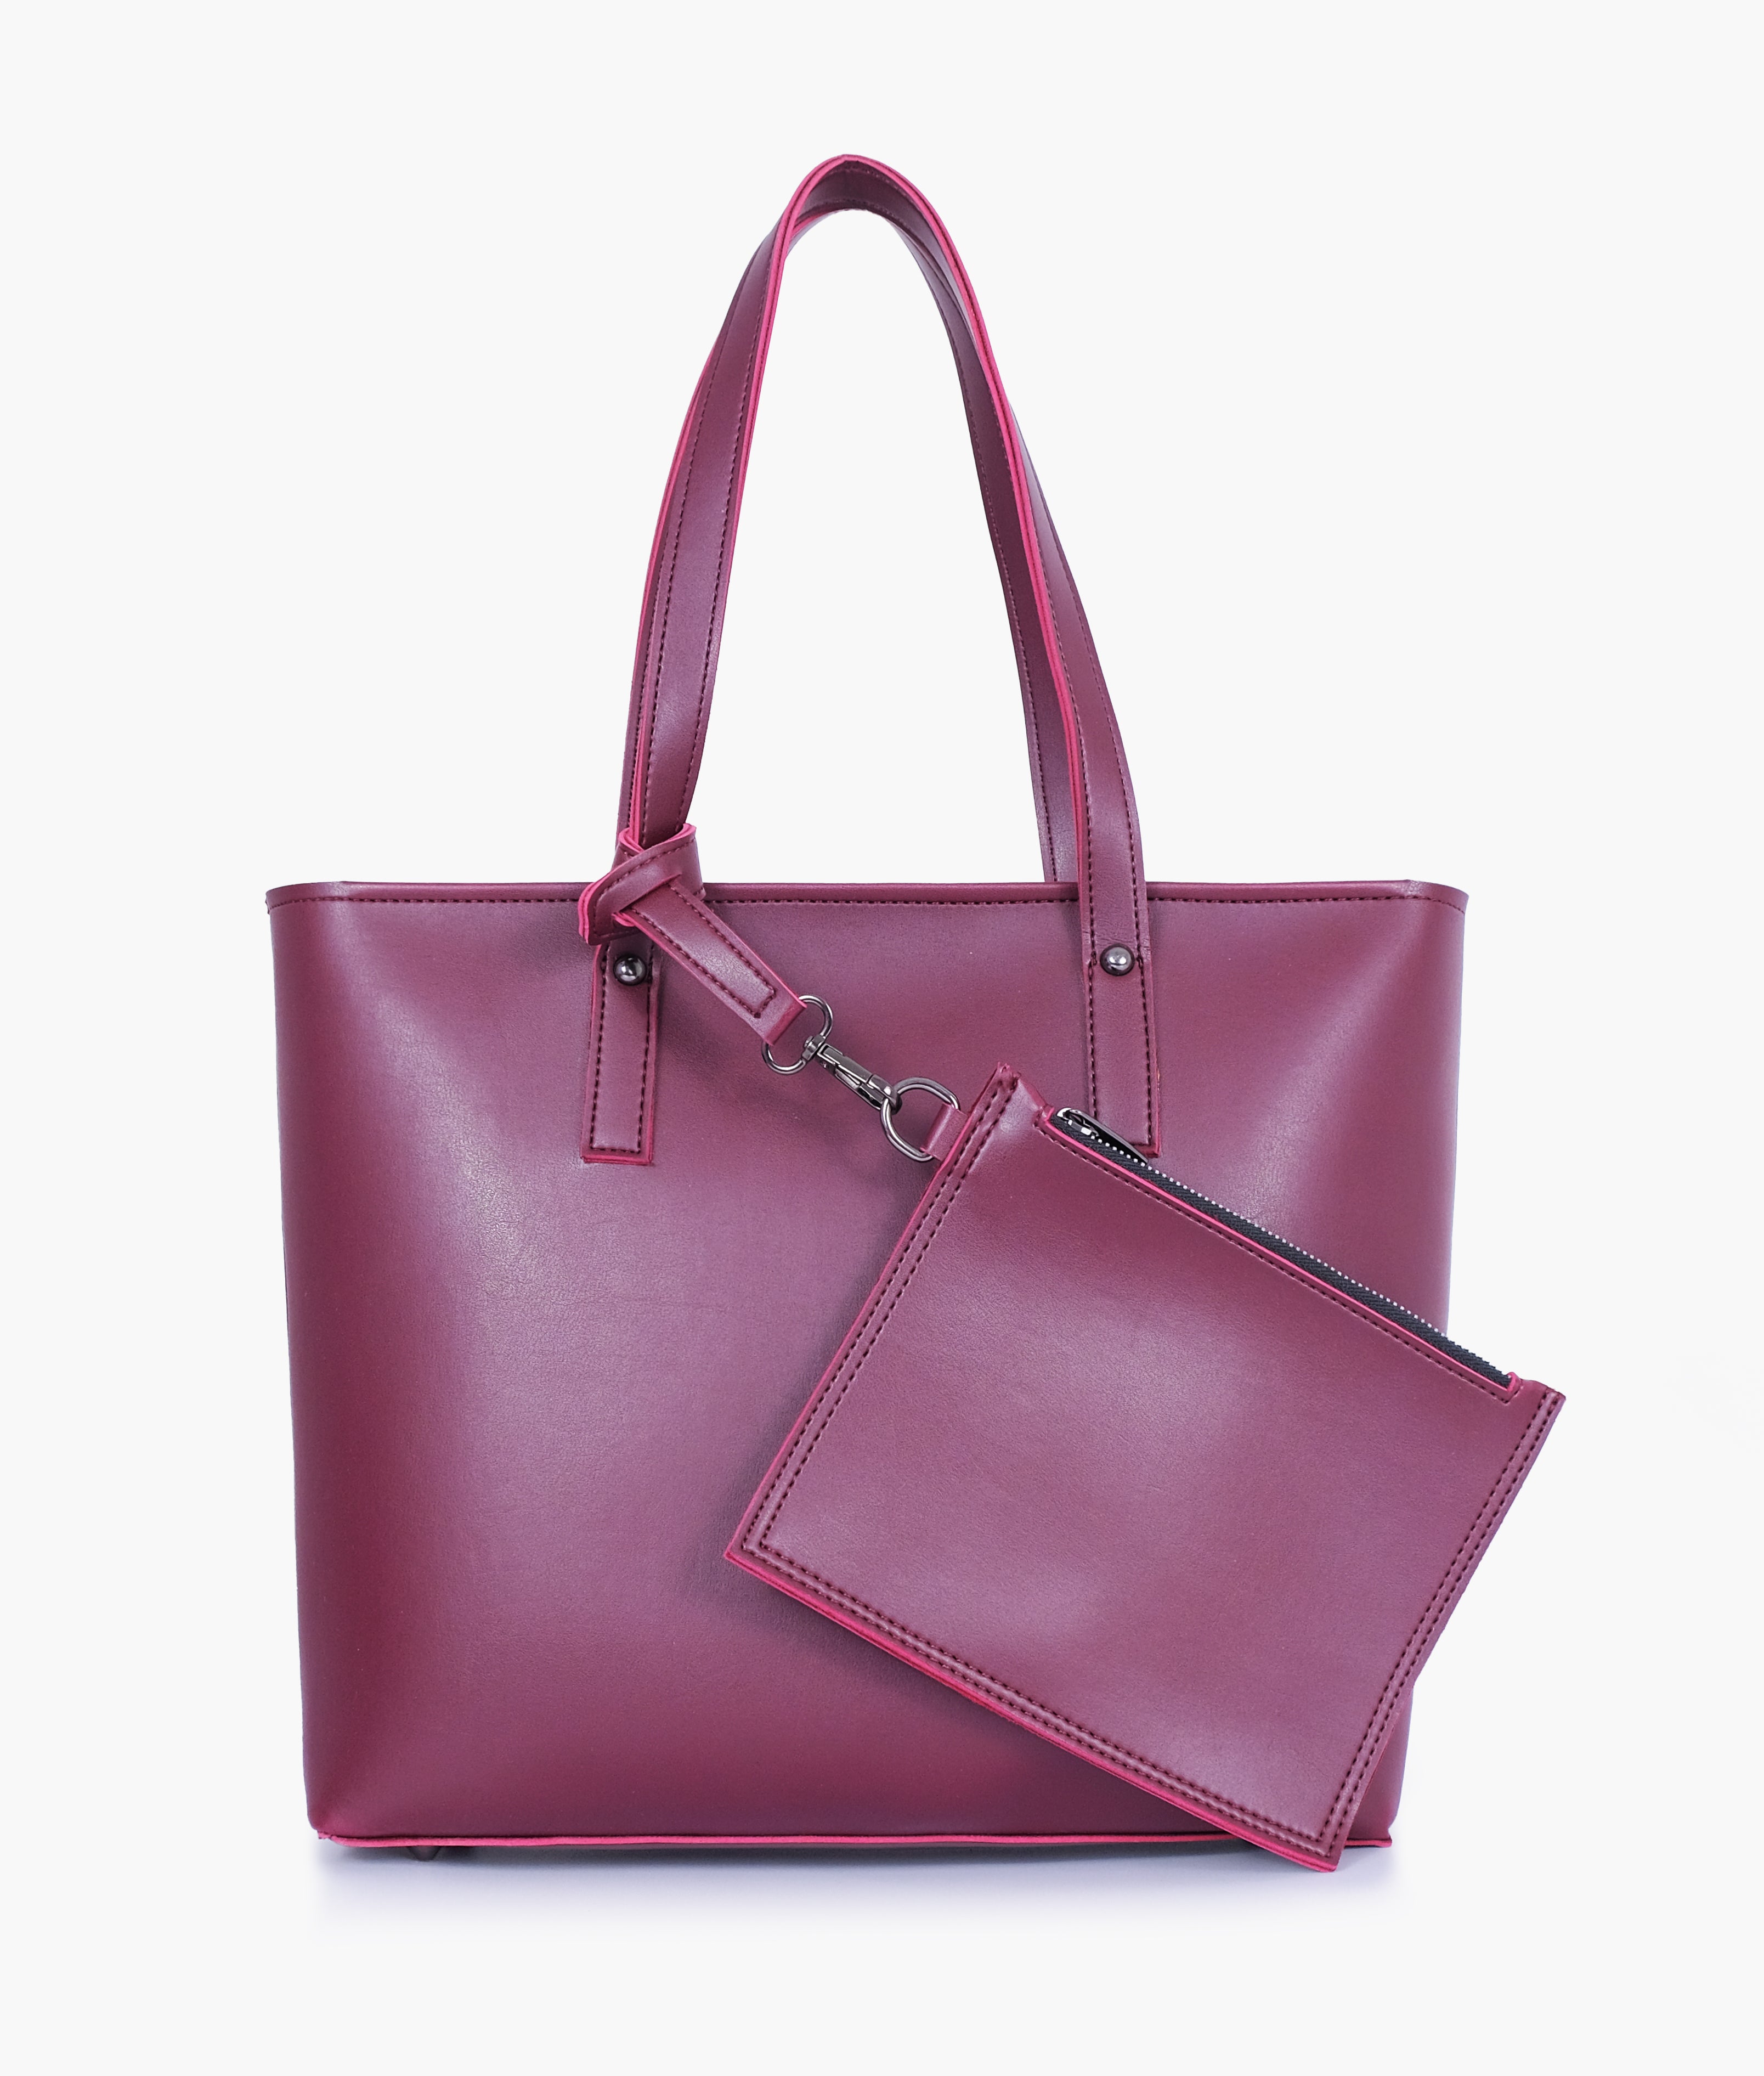 Burgundy tote bag with detachable pouch